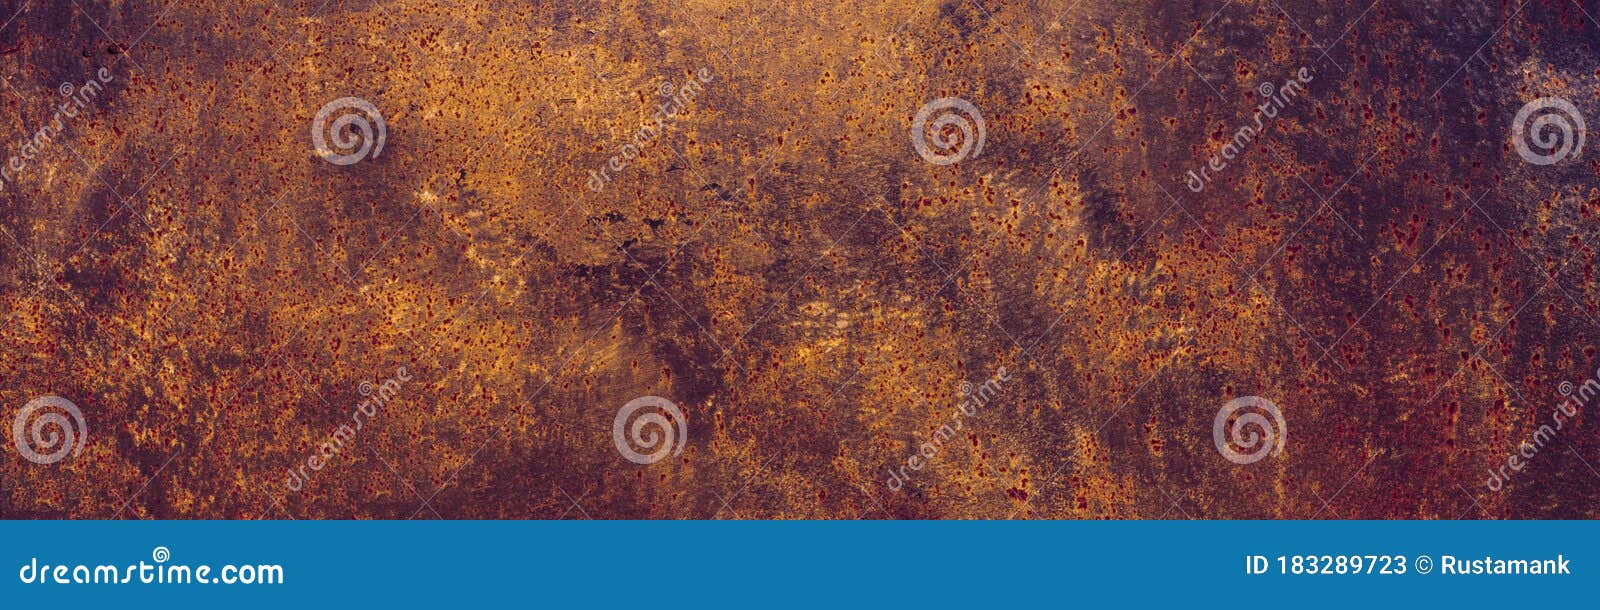 panoramic grunge rusted metal texture. rusty corrosion and oxidized plate